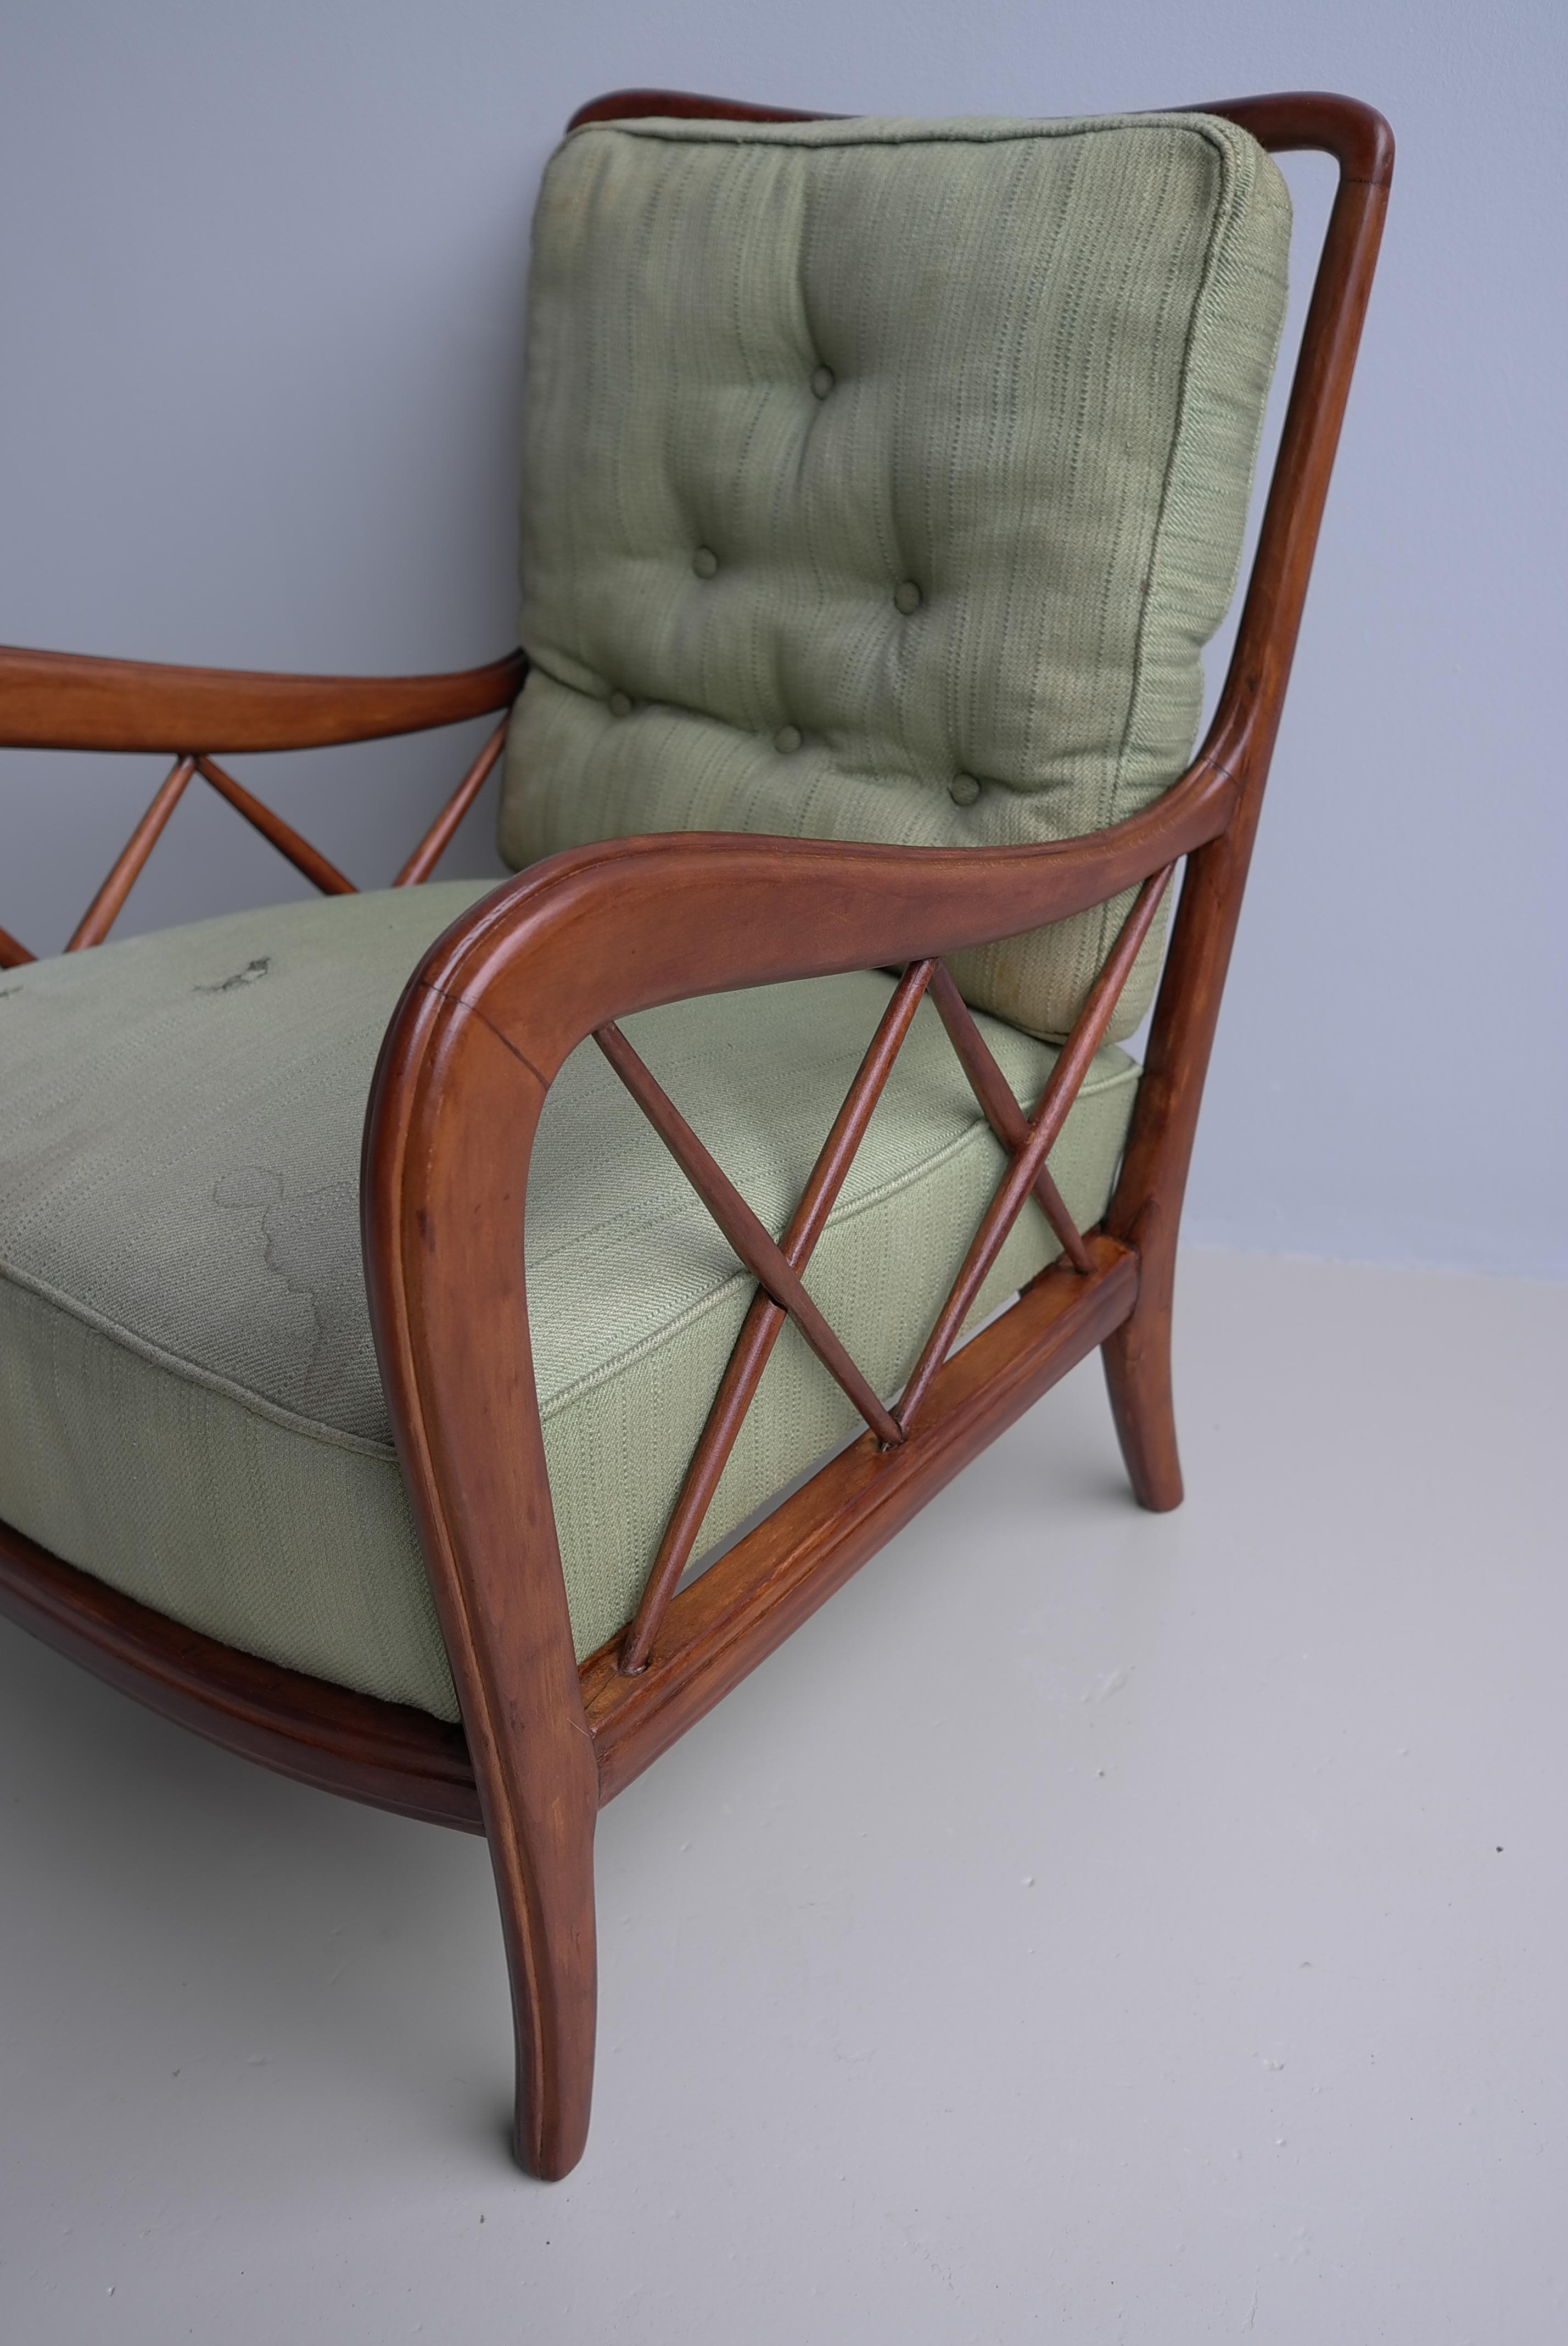 Walnut Wooden Lounge Chairs attr Paolo Buffa, Milan Italy 1940's For Sale 9